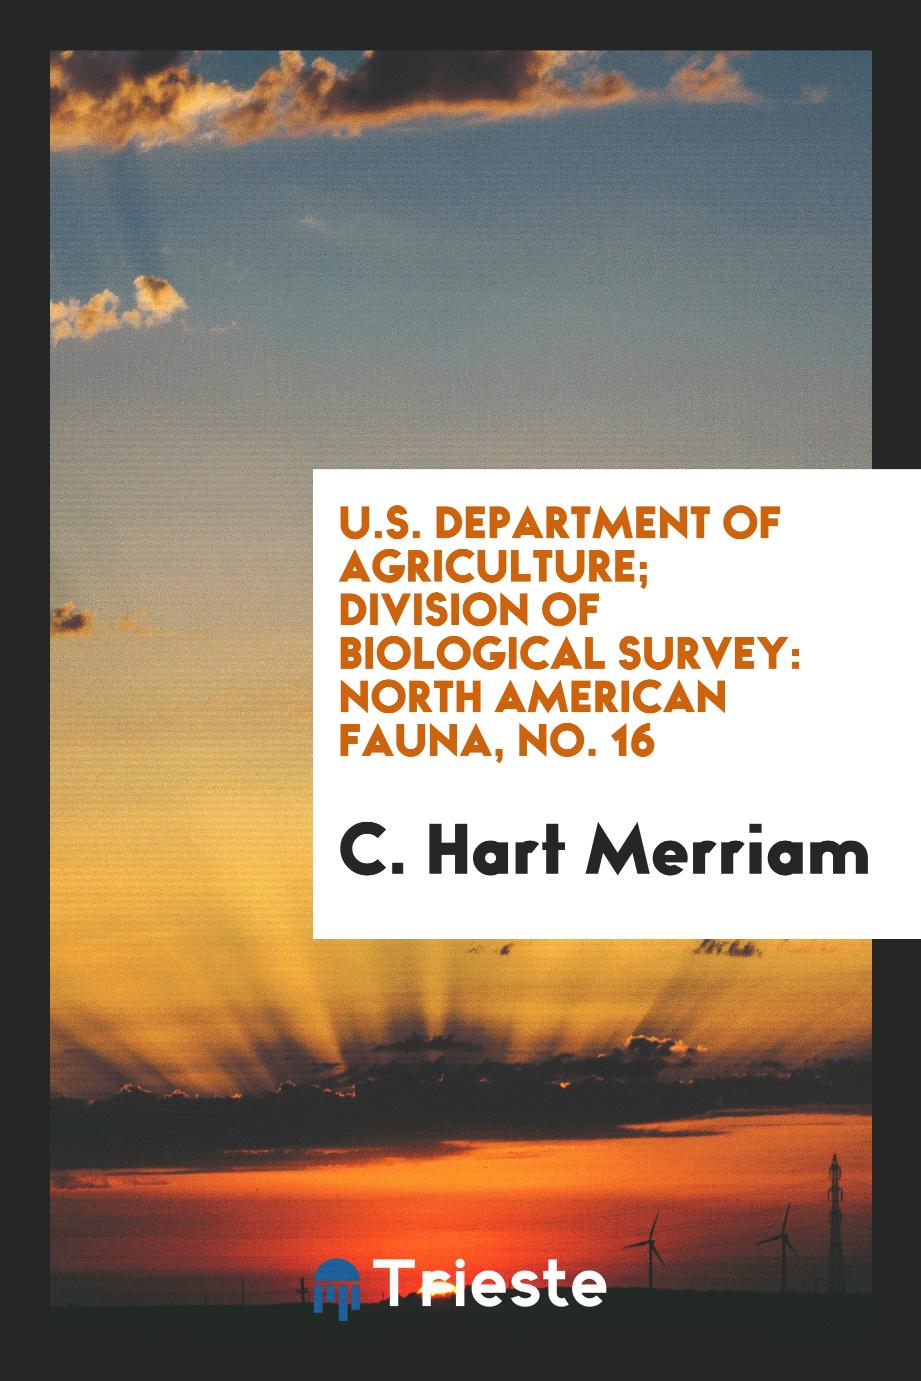 U.S. Department of Agriculture; Division of Biological Survey: North American Fauna, No. 16